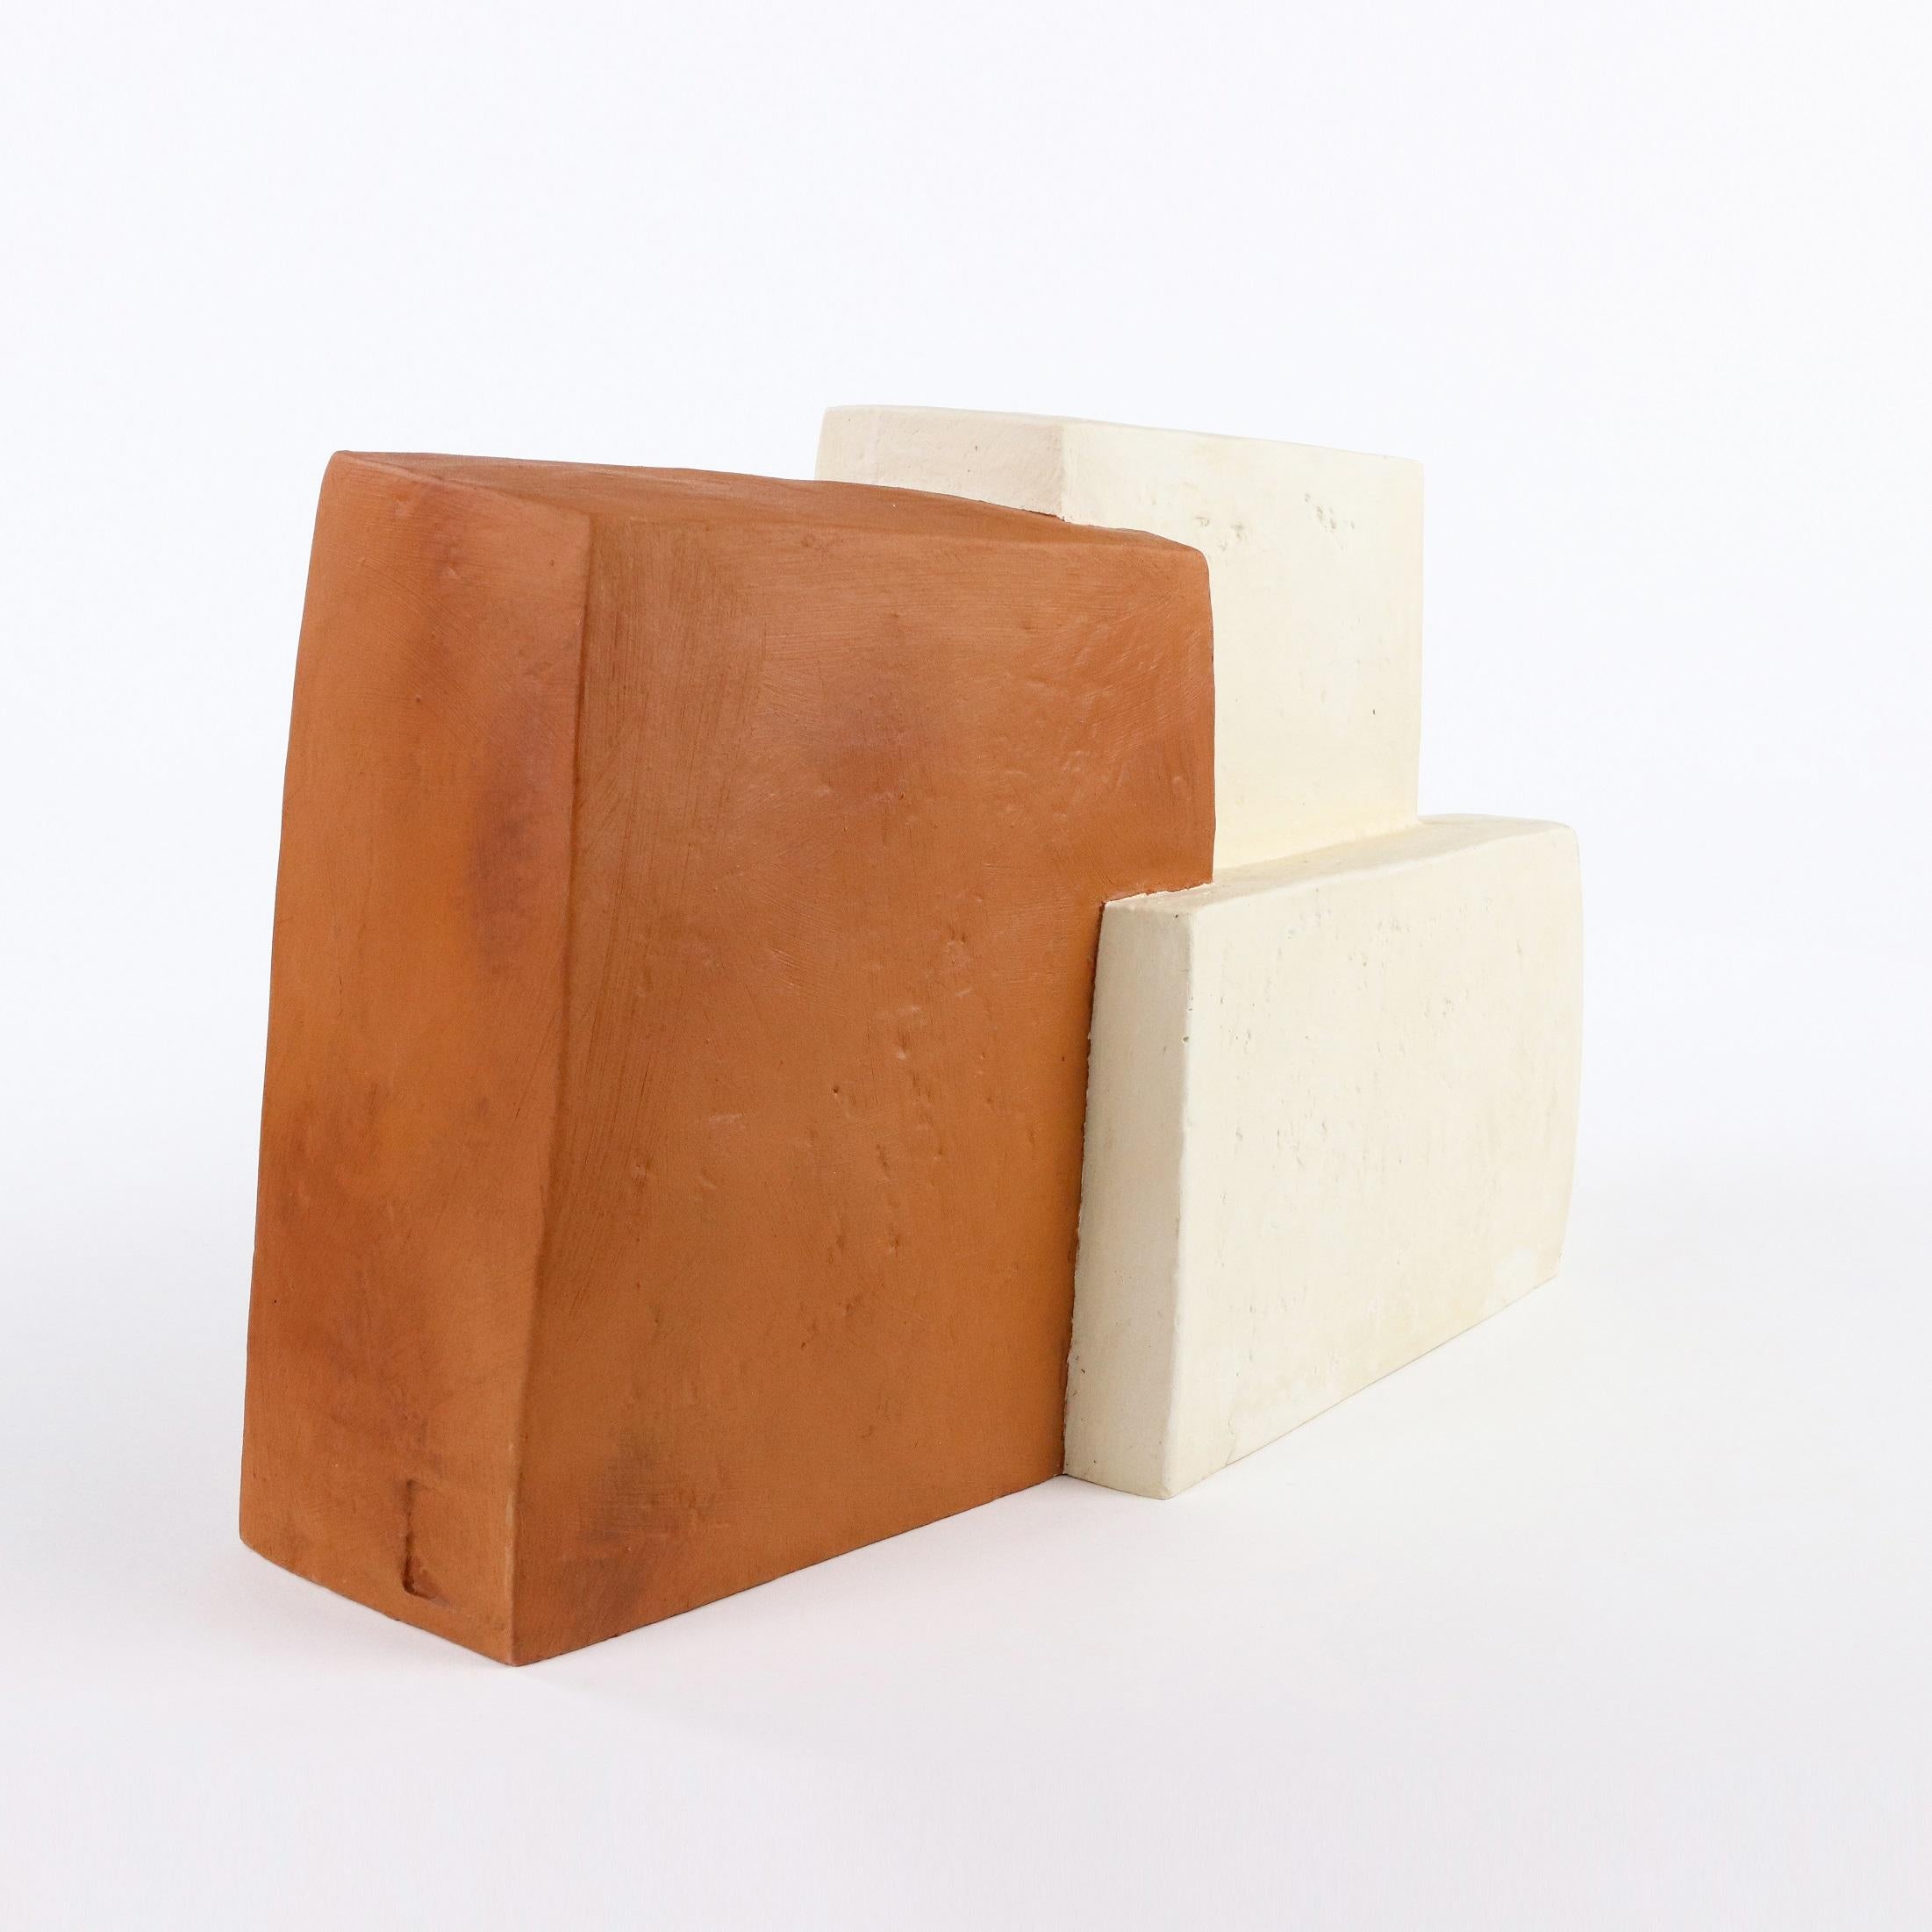 Forms by Delphine Brabant - Abstract geometric sculpture, blocks, white, orange For Sale 4